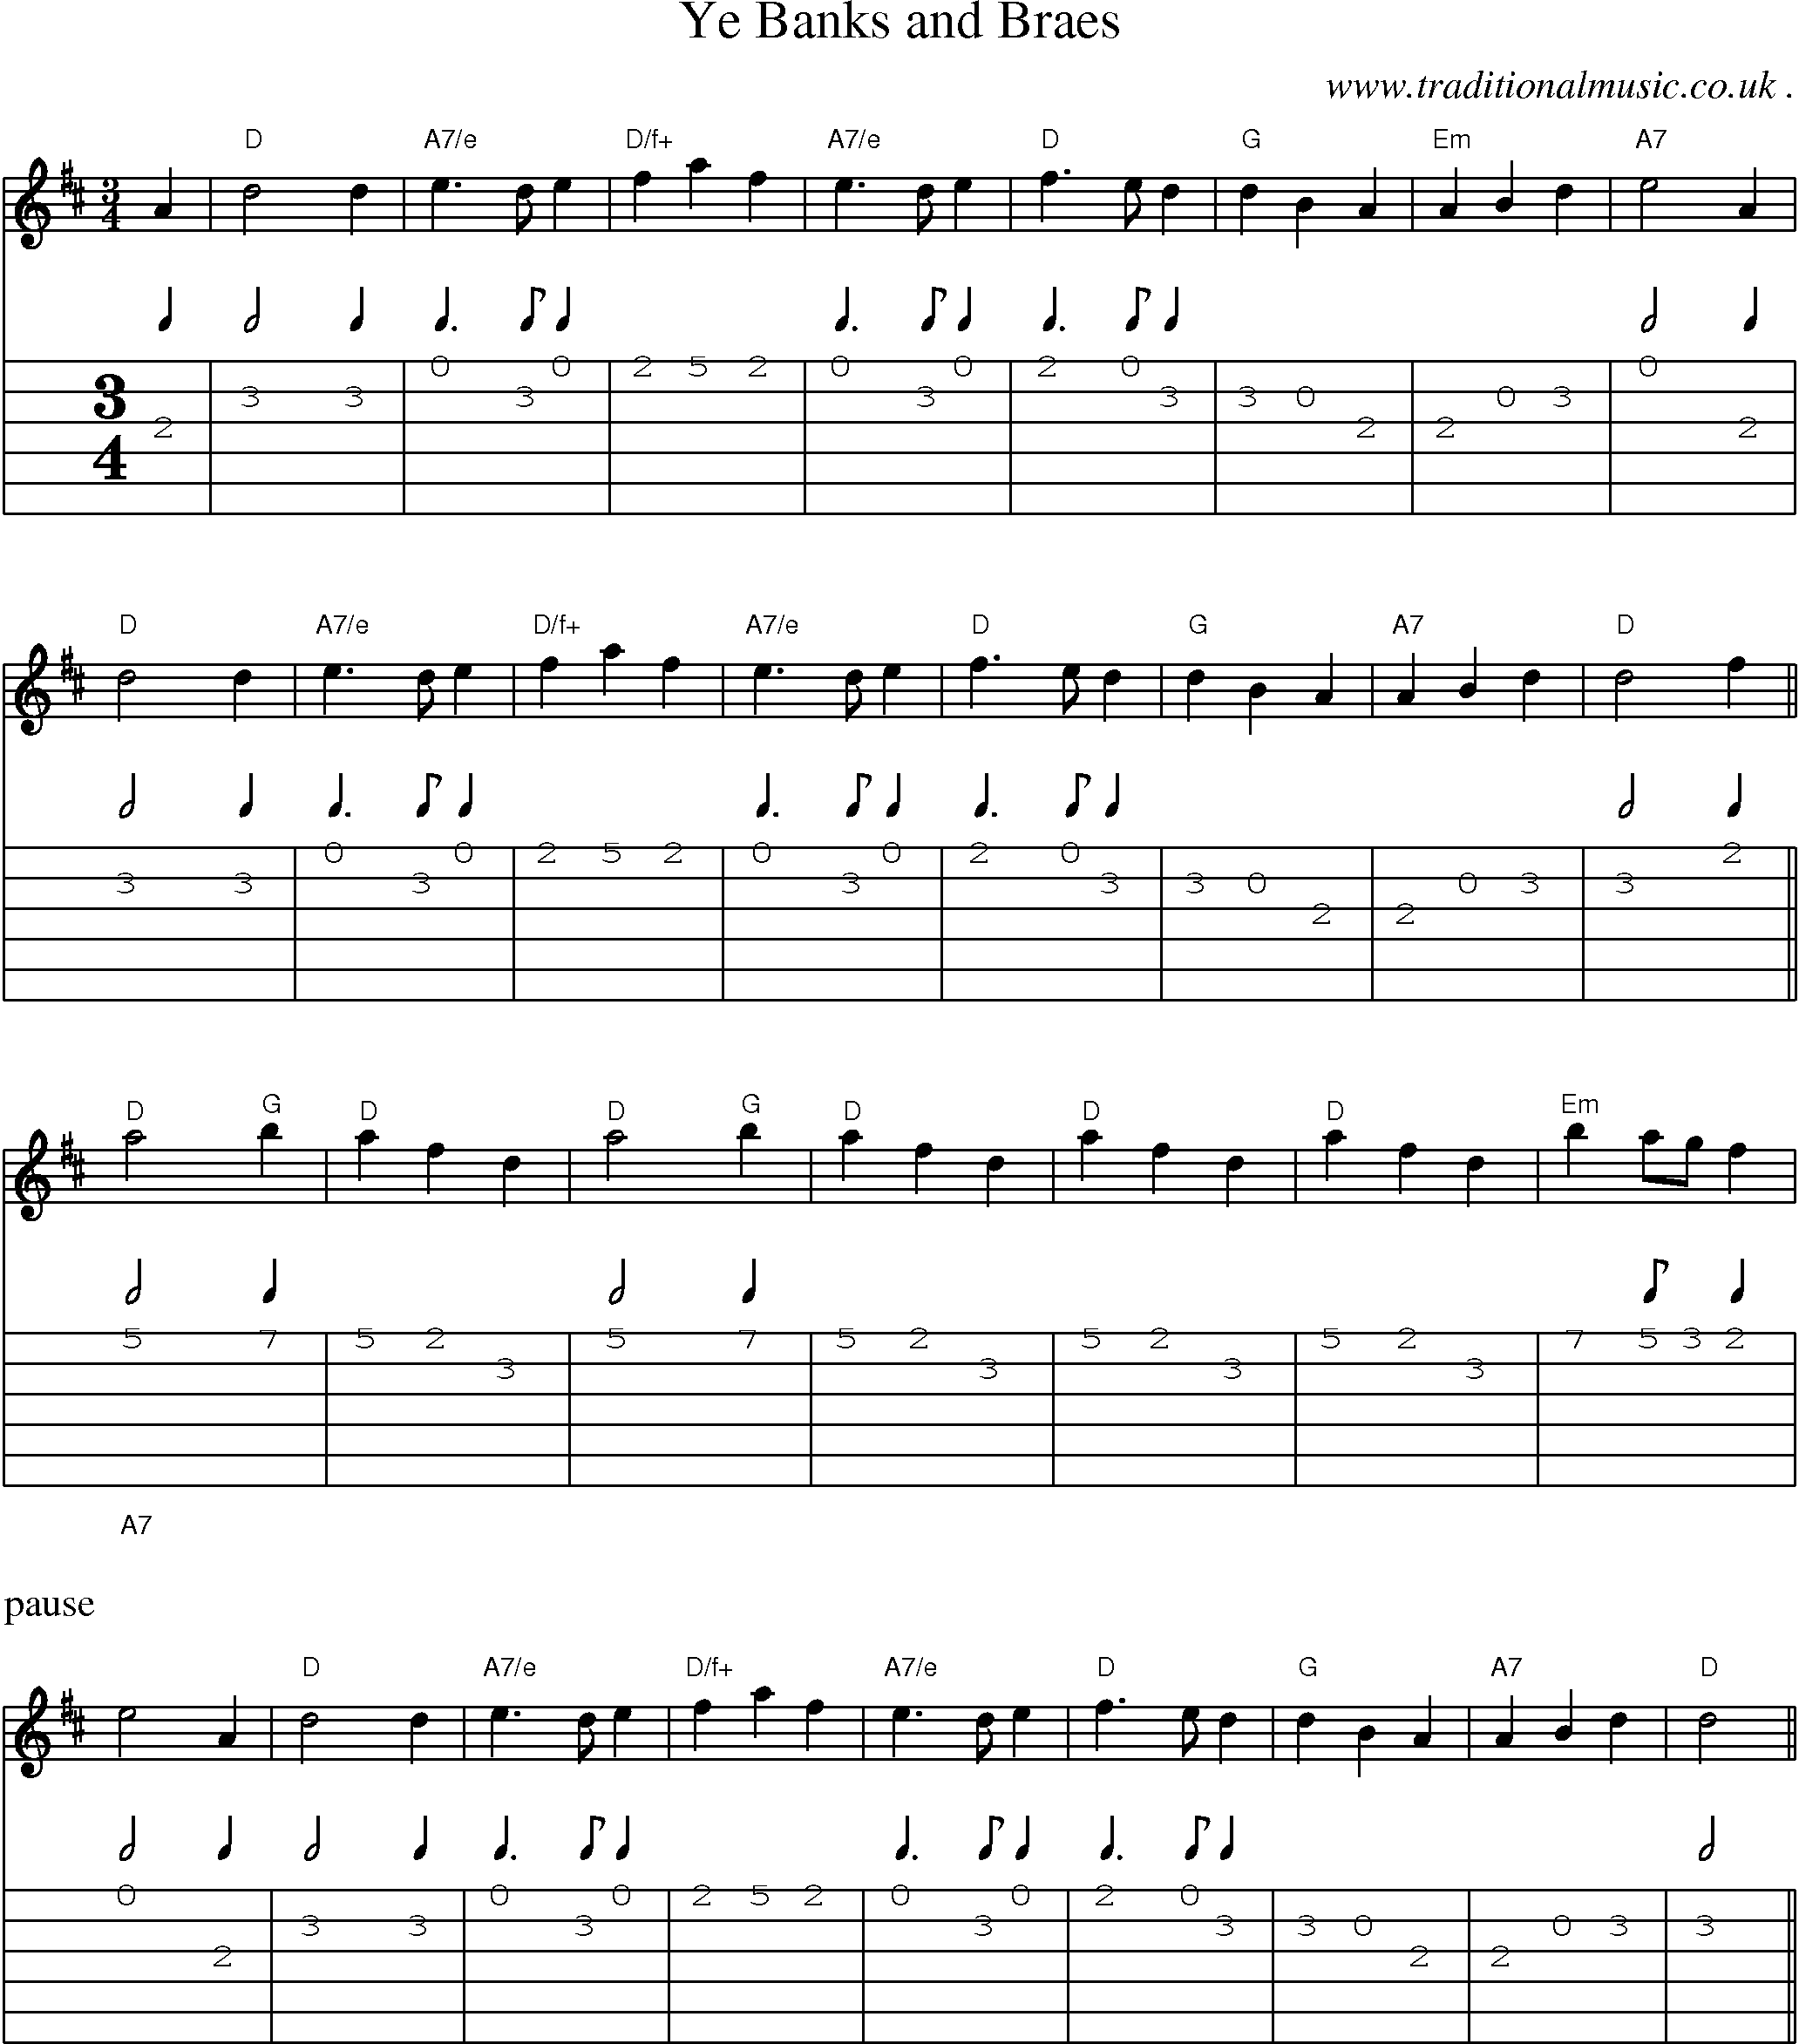 Sheet-music  score, Chords and Guitar Tabs for Ye Banks And Braes